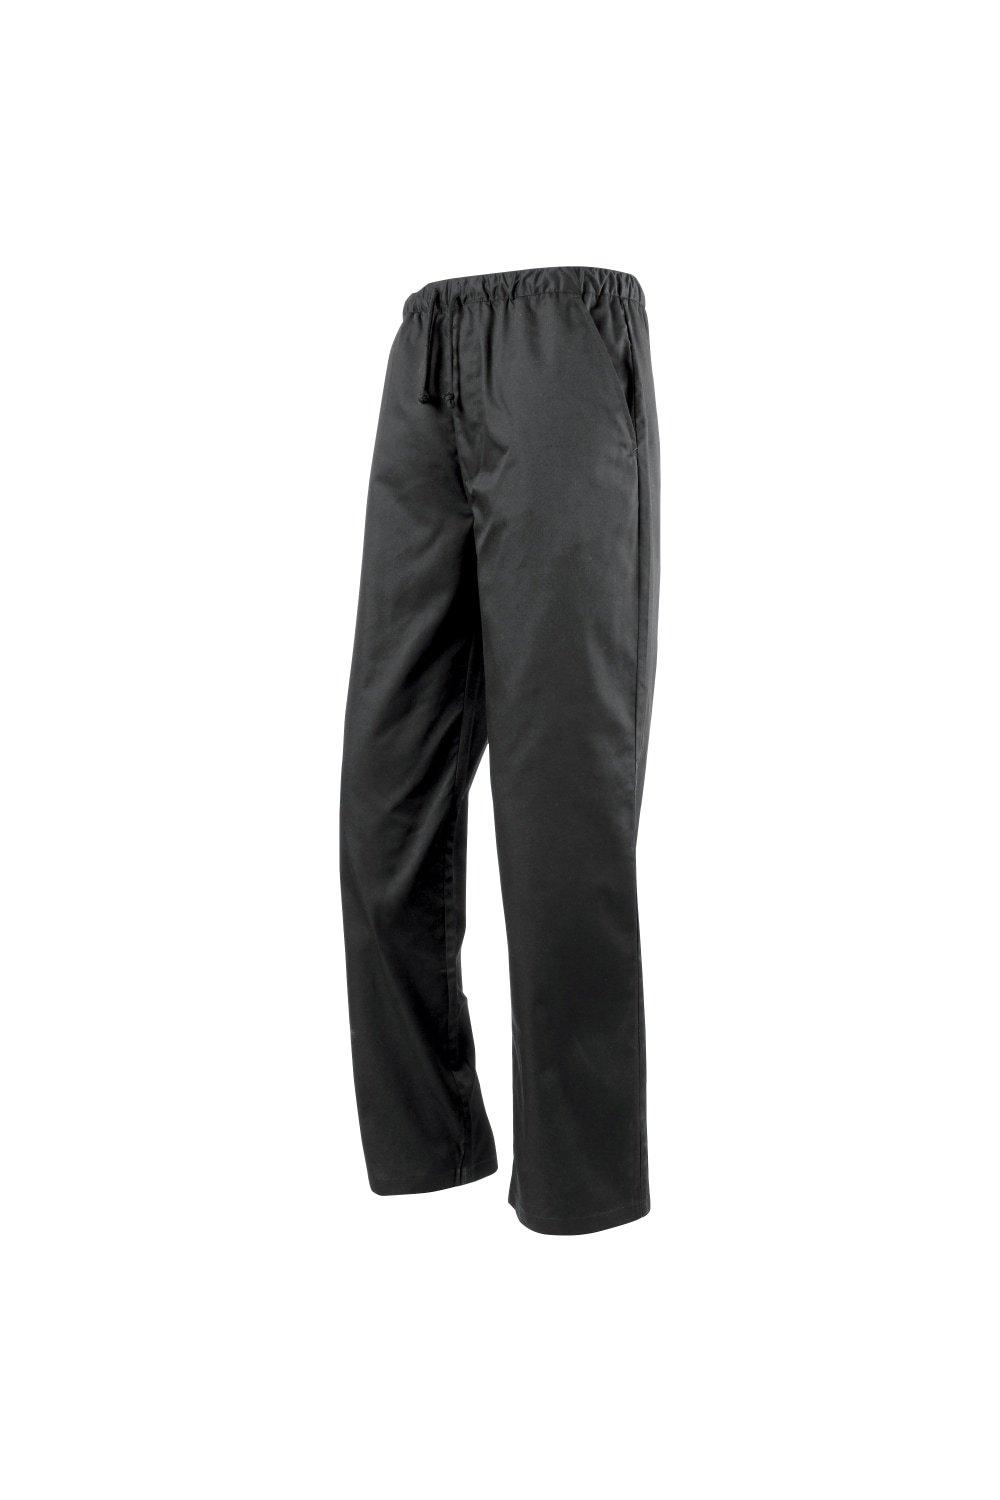 Essential Chefs Trouser Catering Workwear Pack of 2